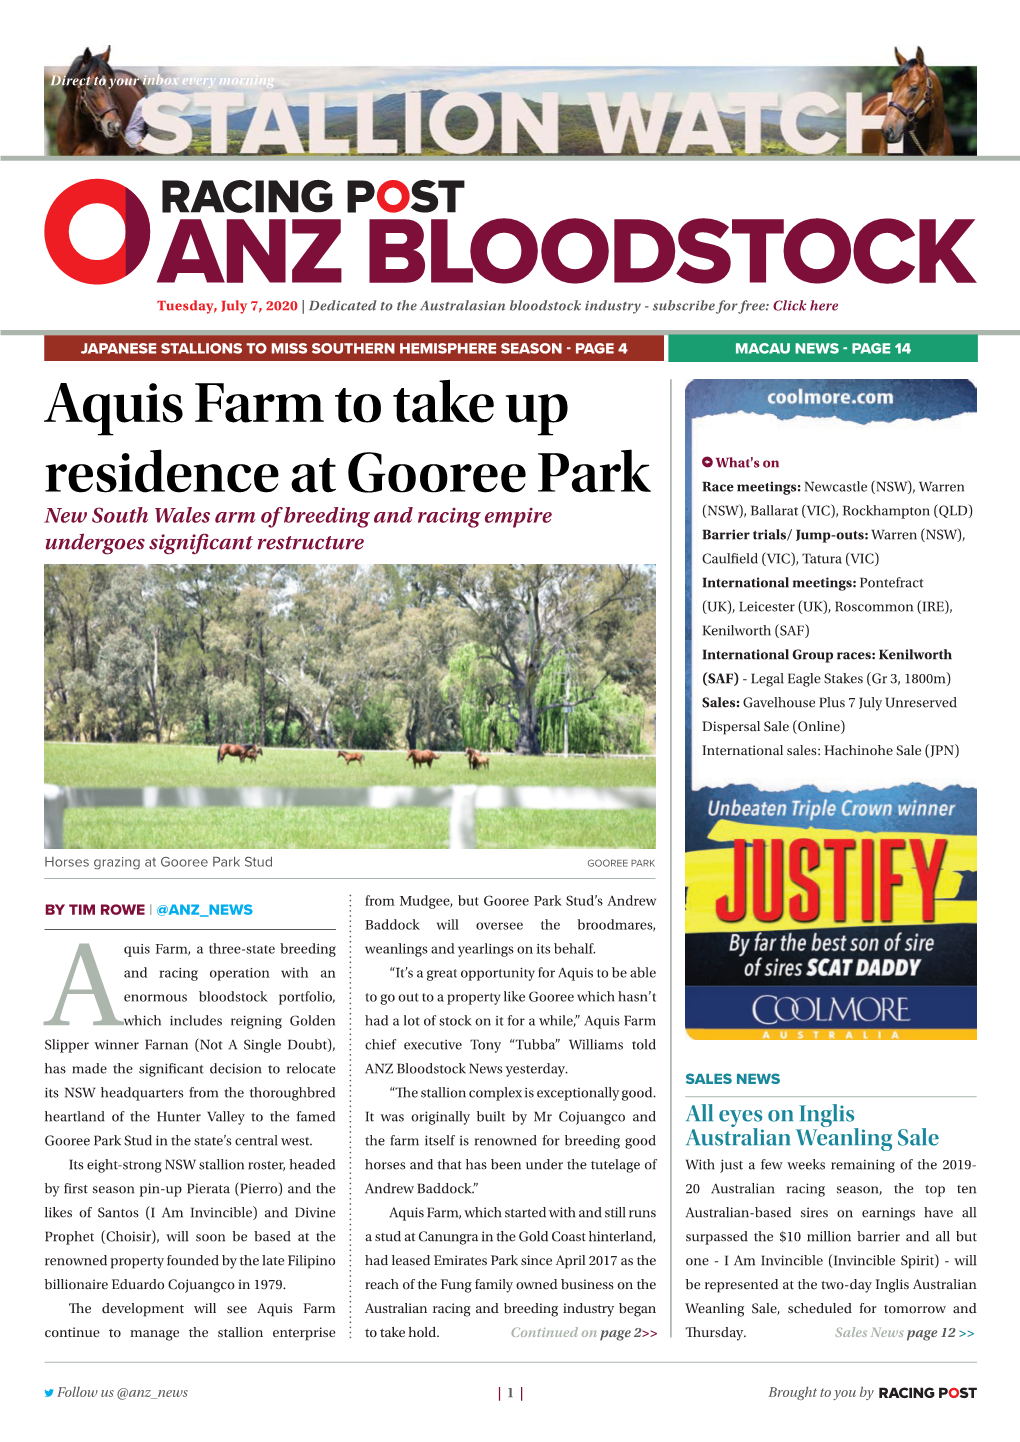 Aquis Farm to Take up Residence at Gooree Park | 2 | Tuesday, July 7, 2020